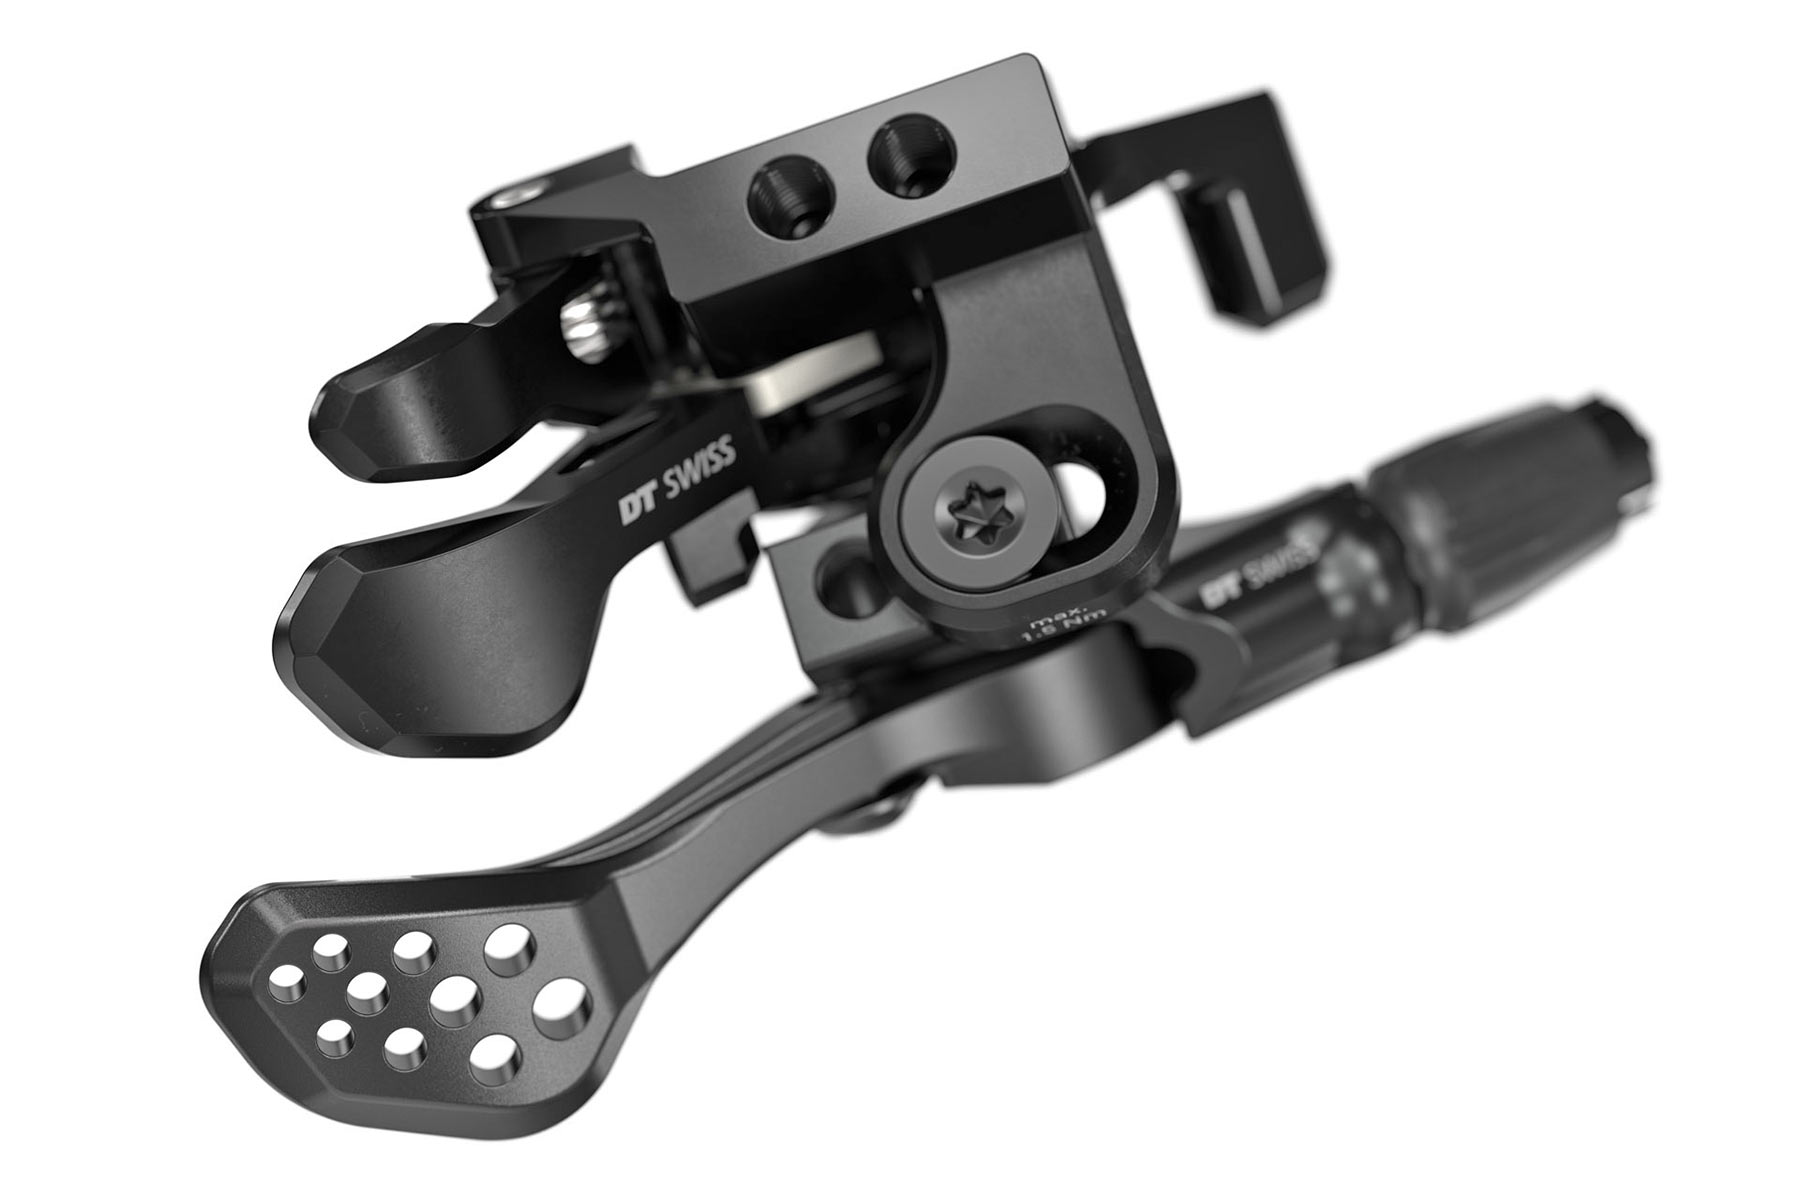 DT Swiss L3 combined ODL suspension and dropper post modular remote